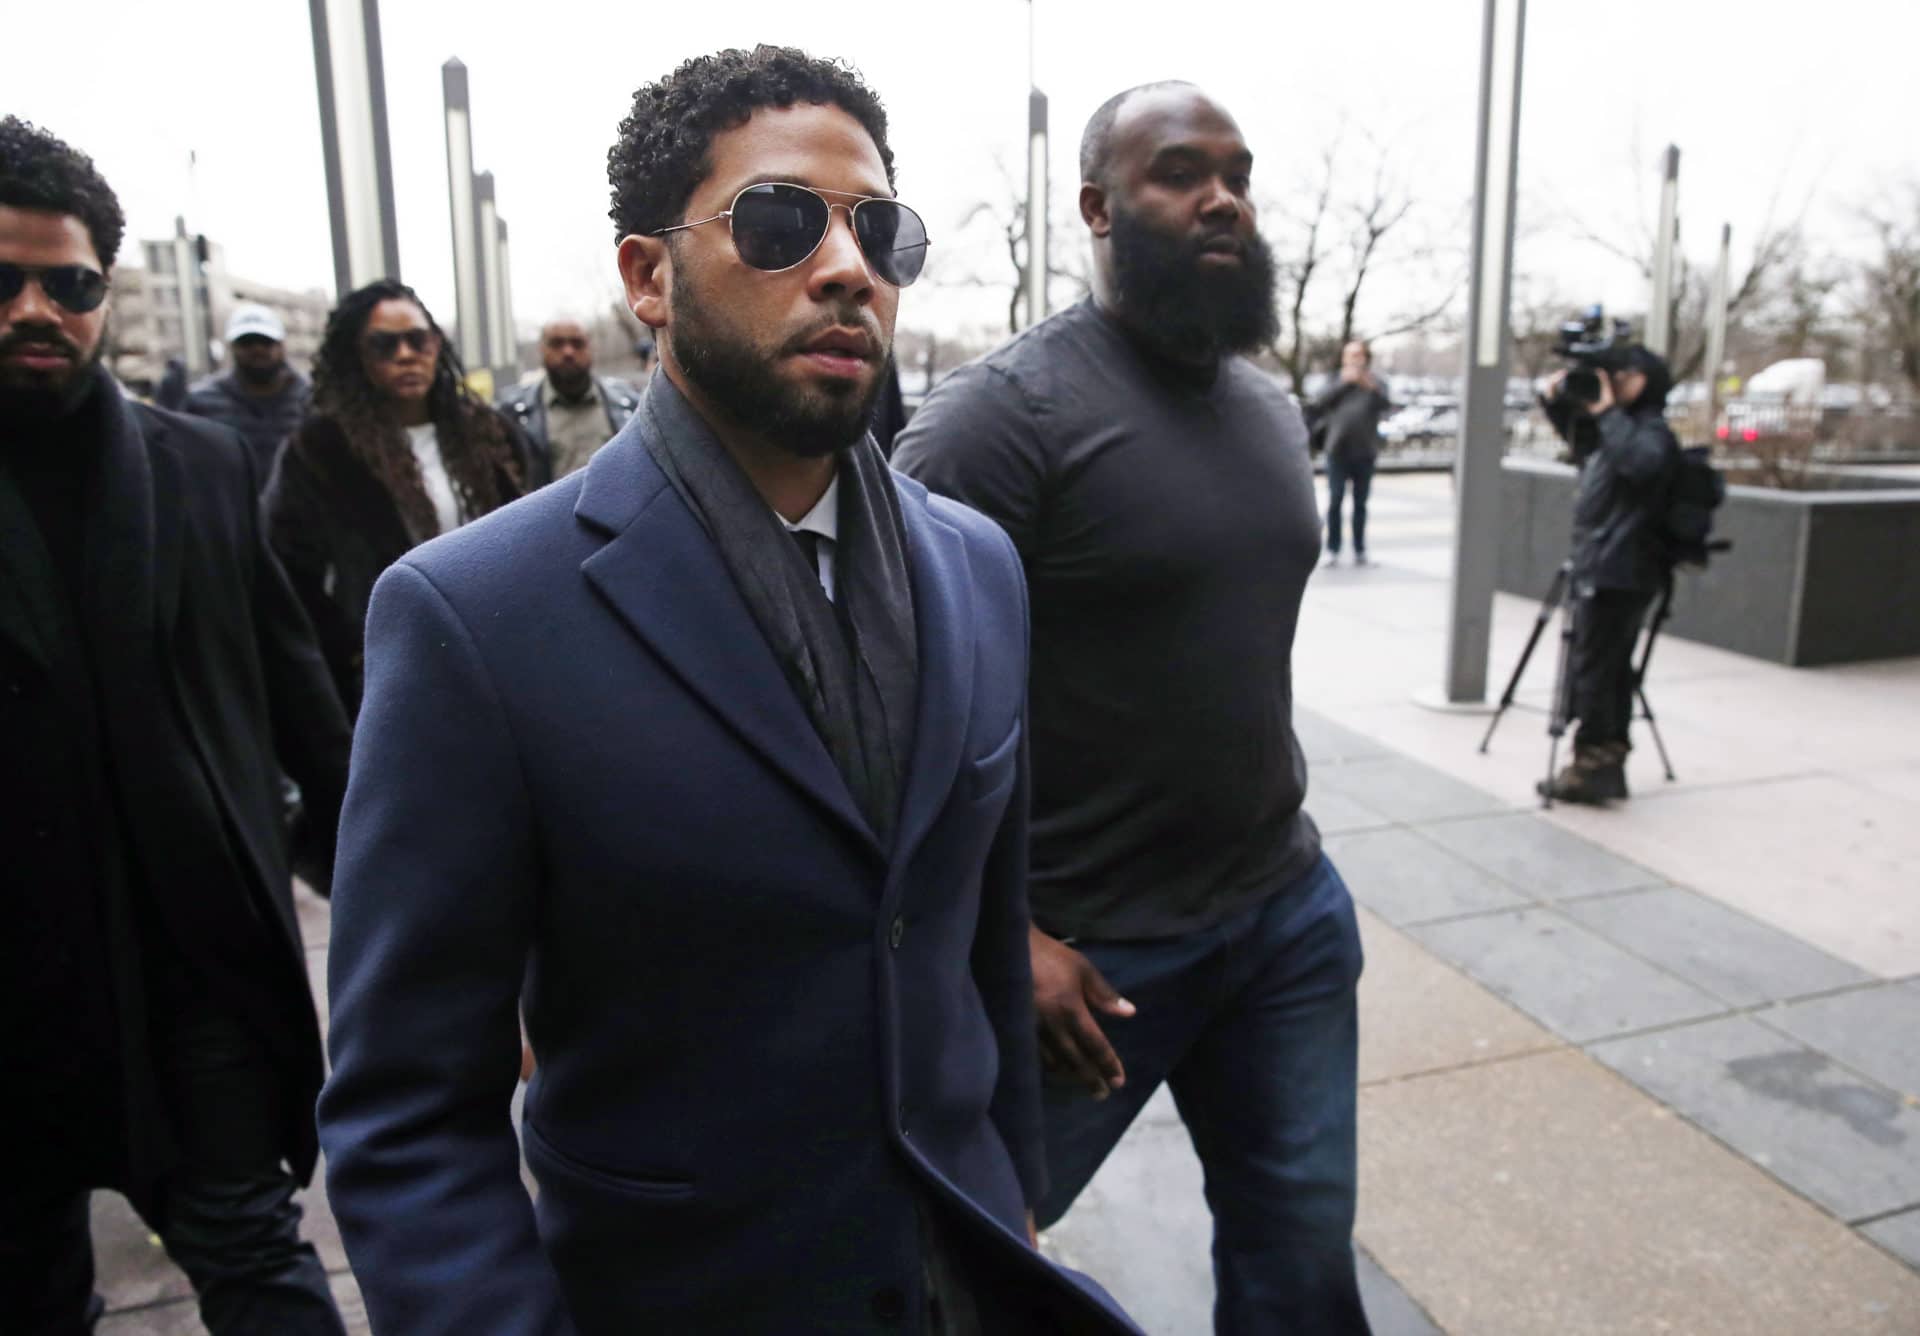 Jussie Smollett's Attorneys Say Charges Against 'Empire' Star Have Been Dropped